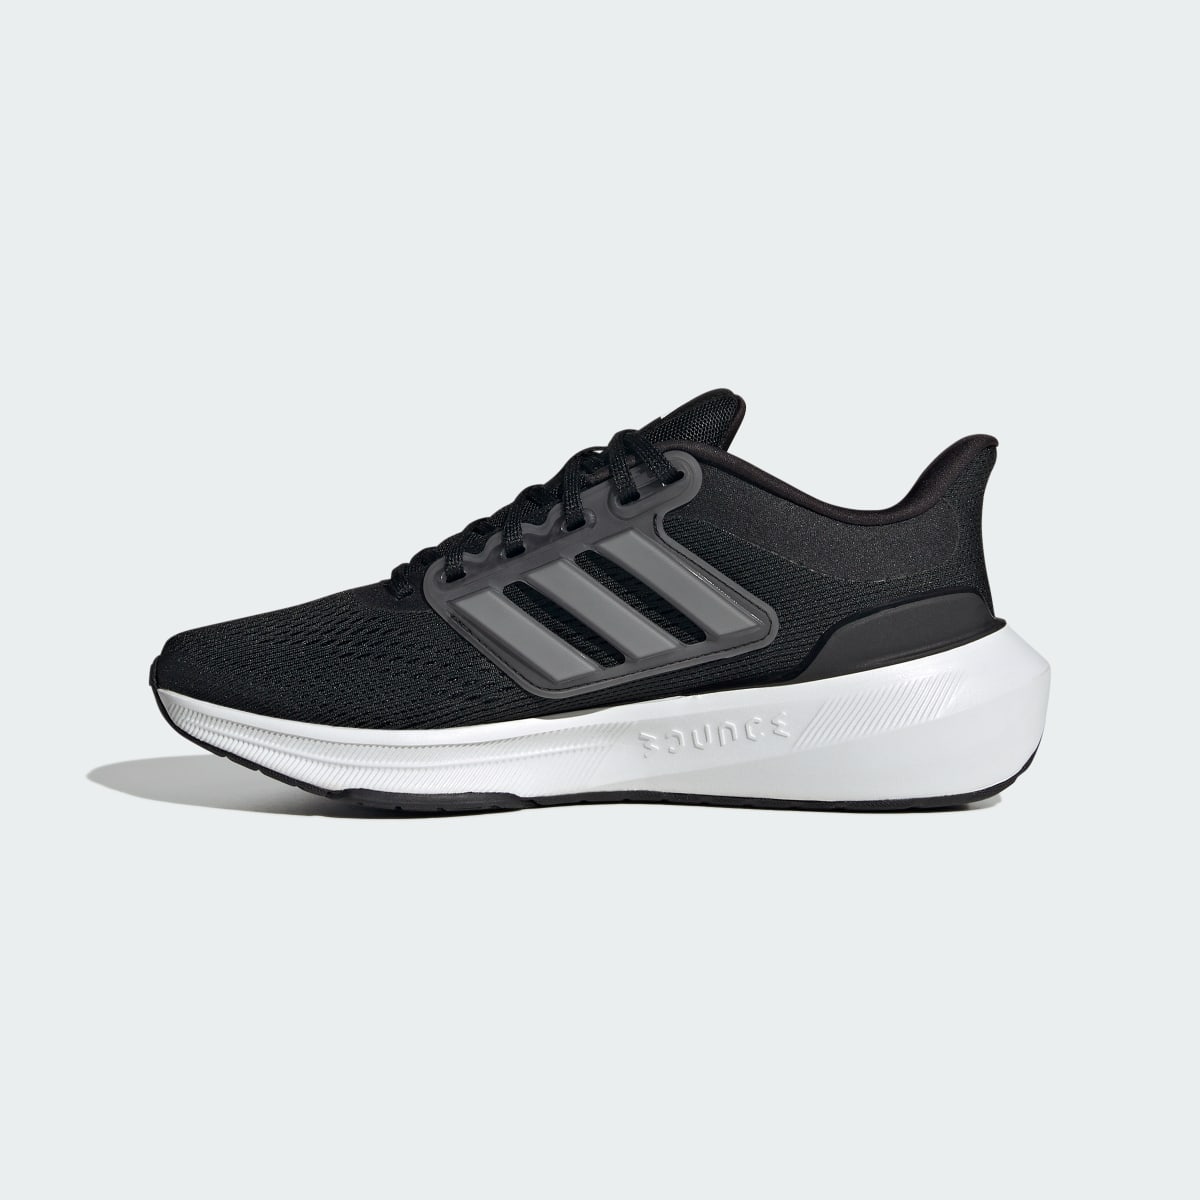 Adidas Ultrabounce Wide Running Shoes. 9